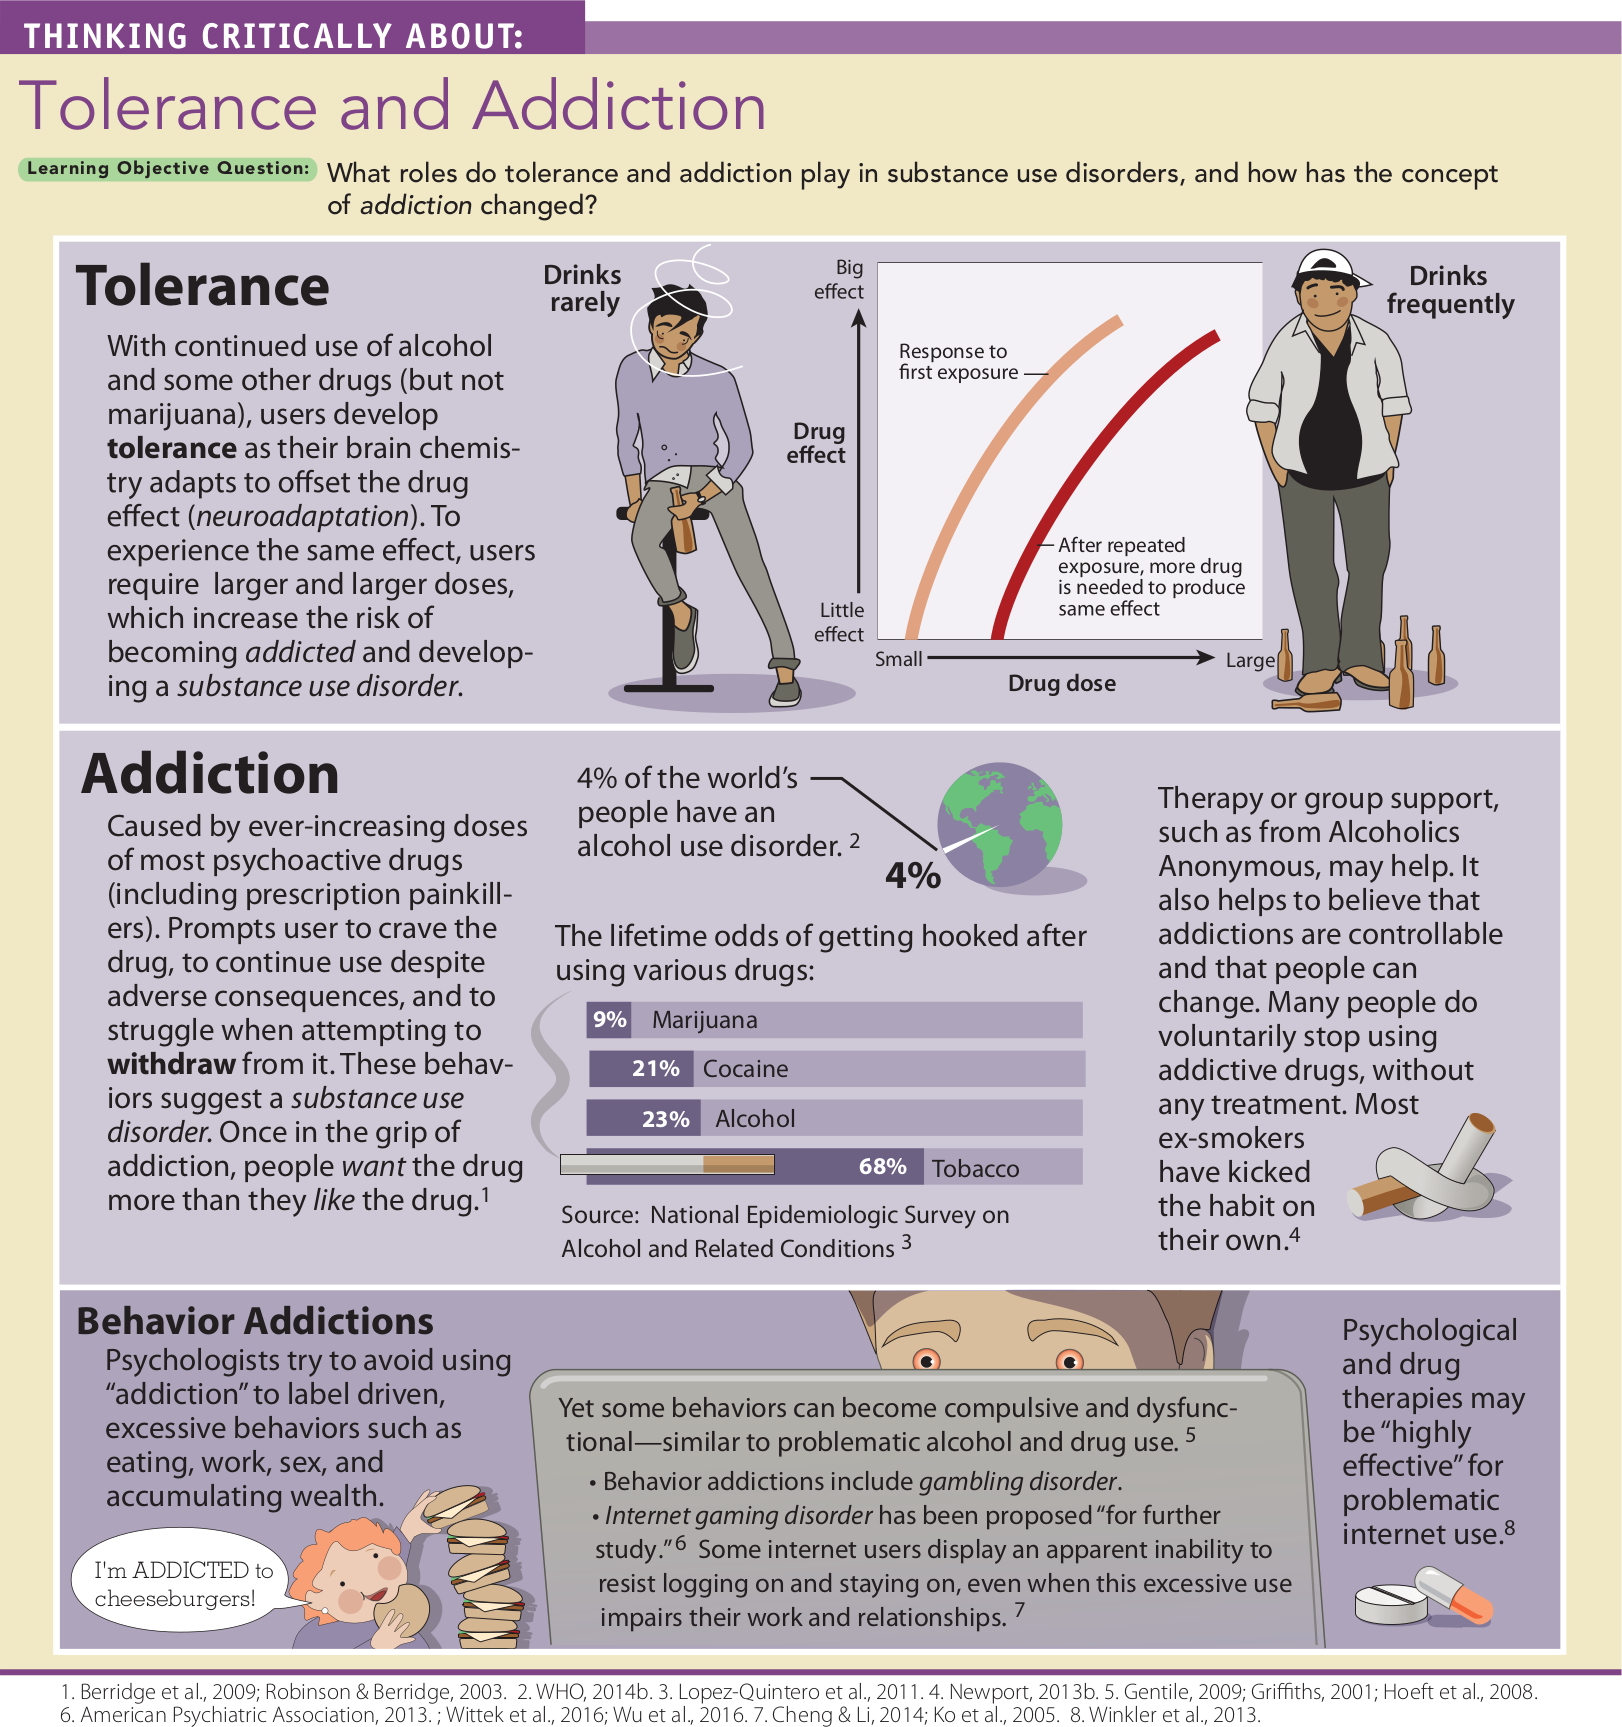 An illustration lists the causes and effects of tolerance, addiction and behavior addictions. You can read full description from the link below